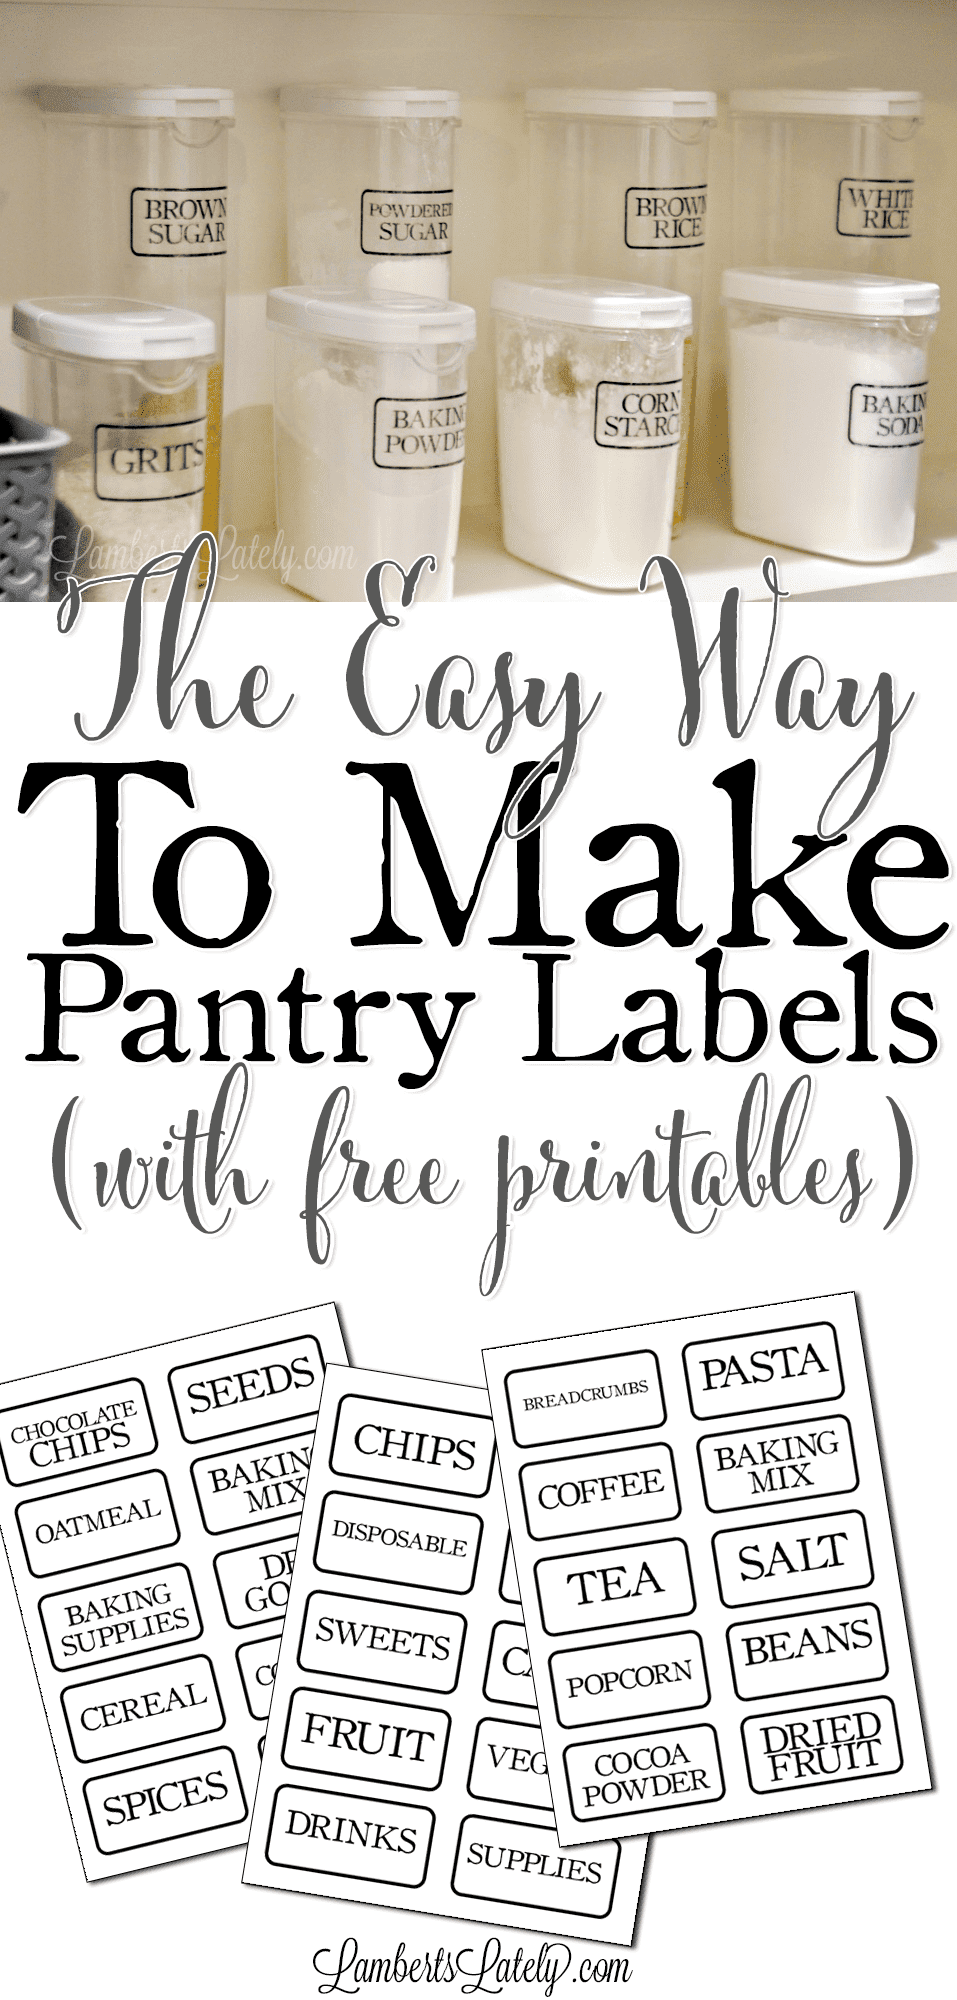 the easy way to make pantry labels with free printables.